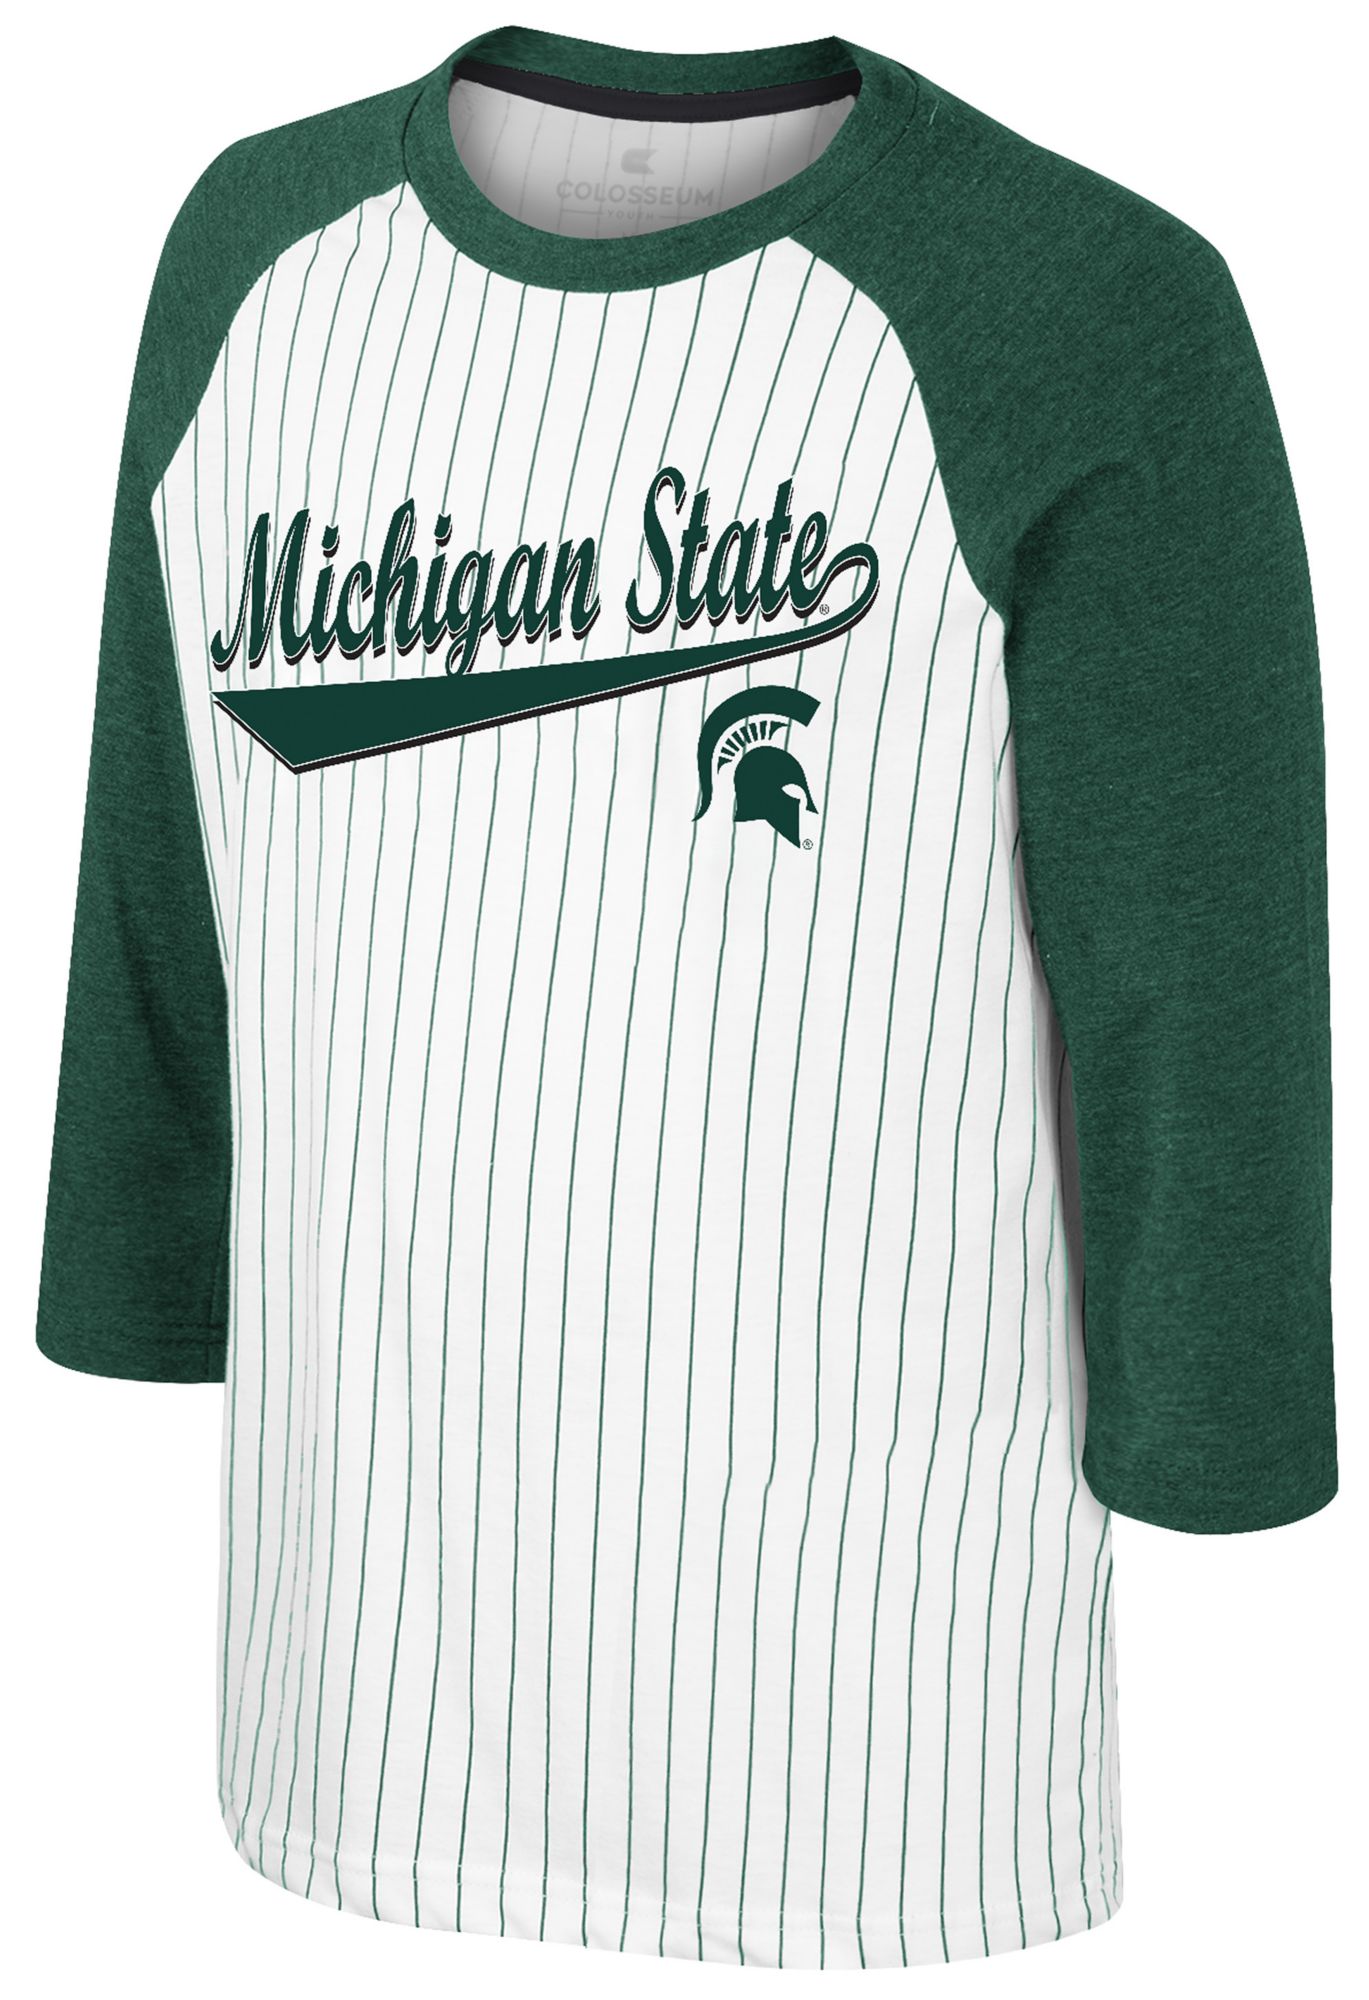 Michigan State Spartans swimming MVP jersey